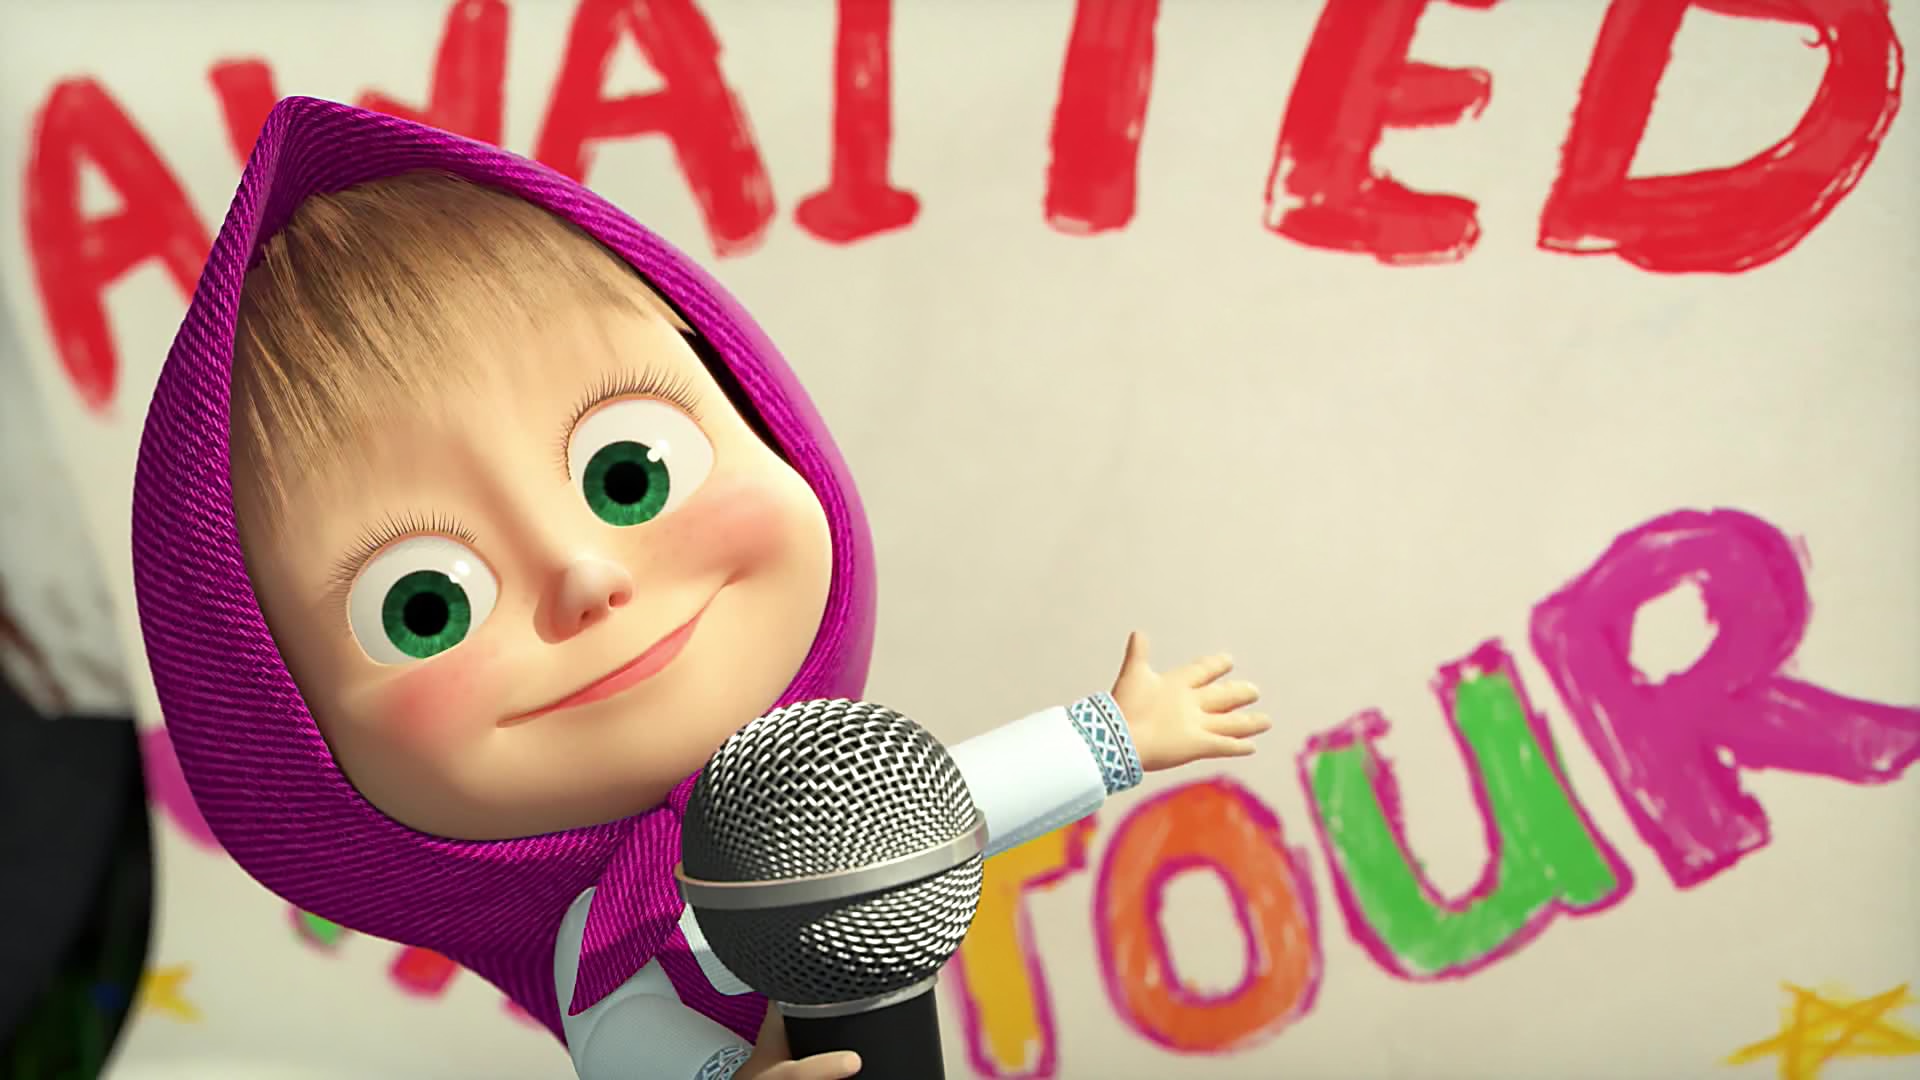 Watch Masha And The Bear Season 4 Episode 1 Where All Love To Sing Watch Full Episode Online 